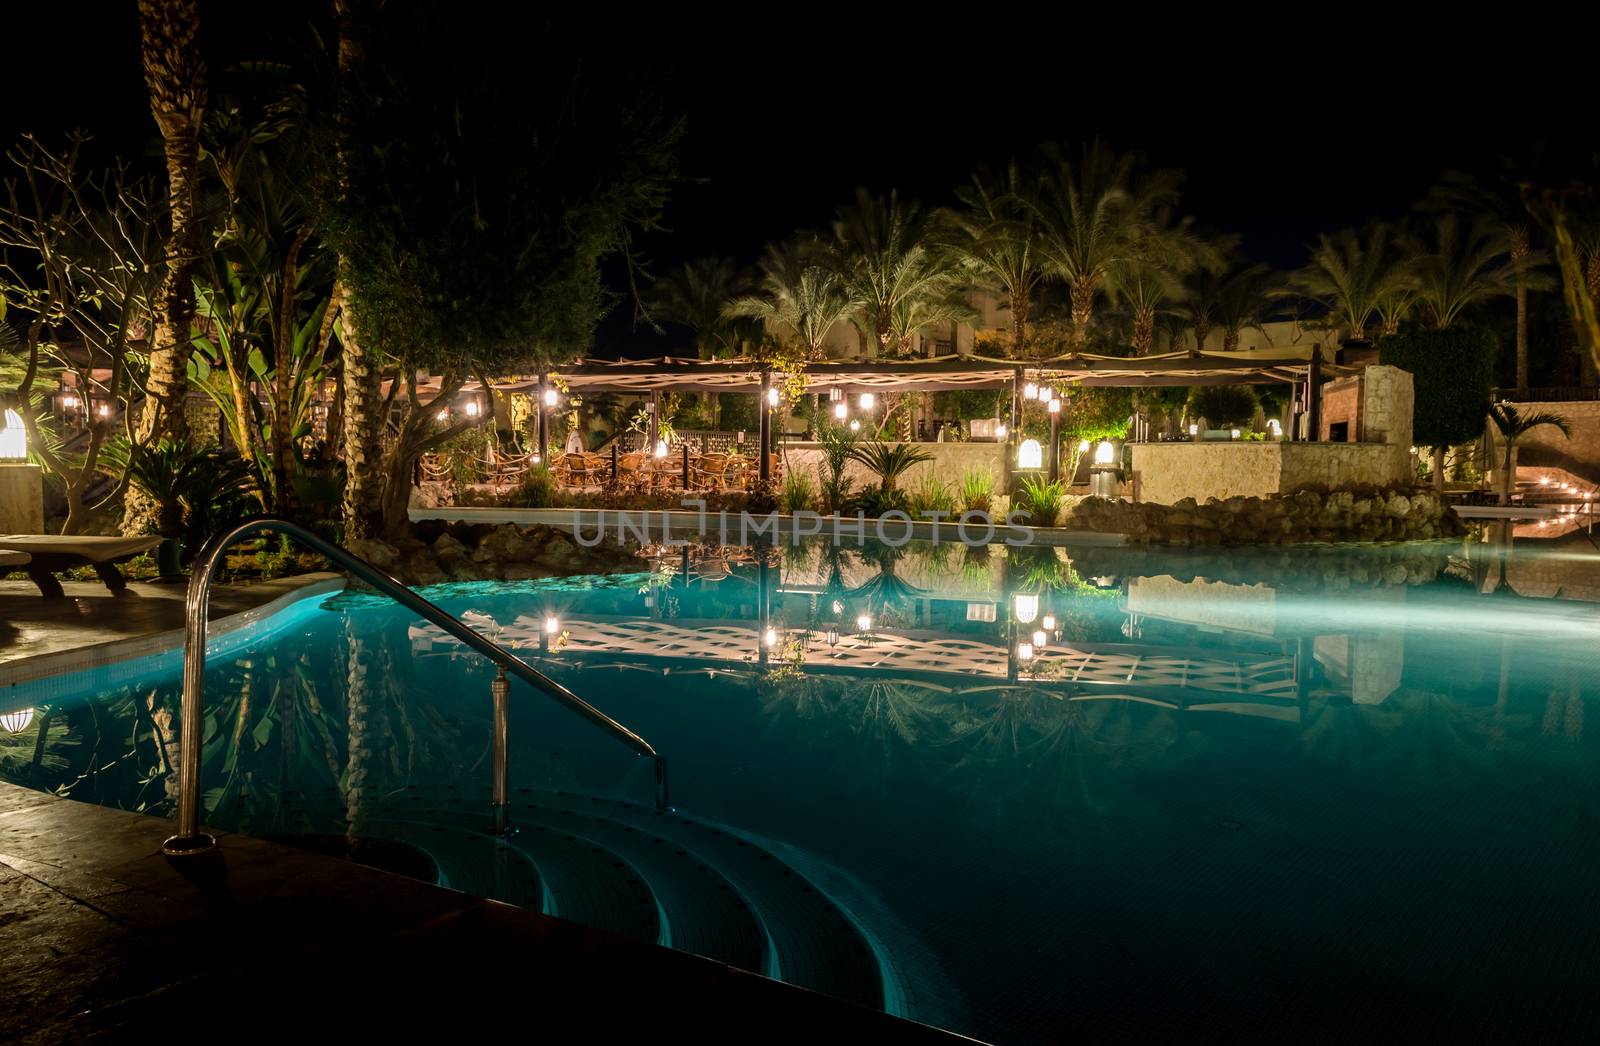 Sharm El Sheikh, Egypt - 02 06 2018: night in the hotel aquamarine pool empty armchairs in the bar palm trees light lanterns reflected in the water